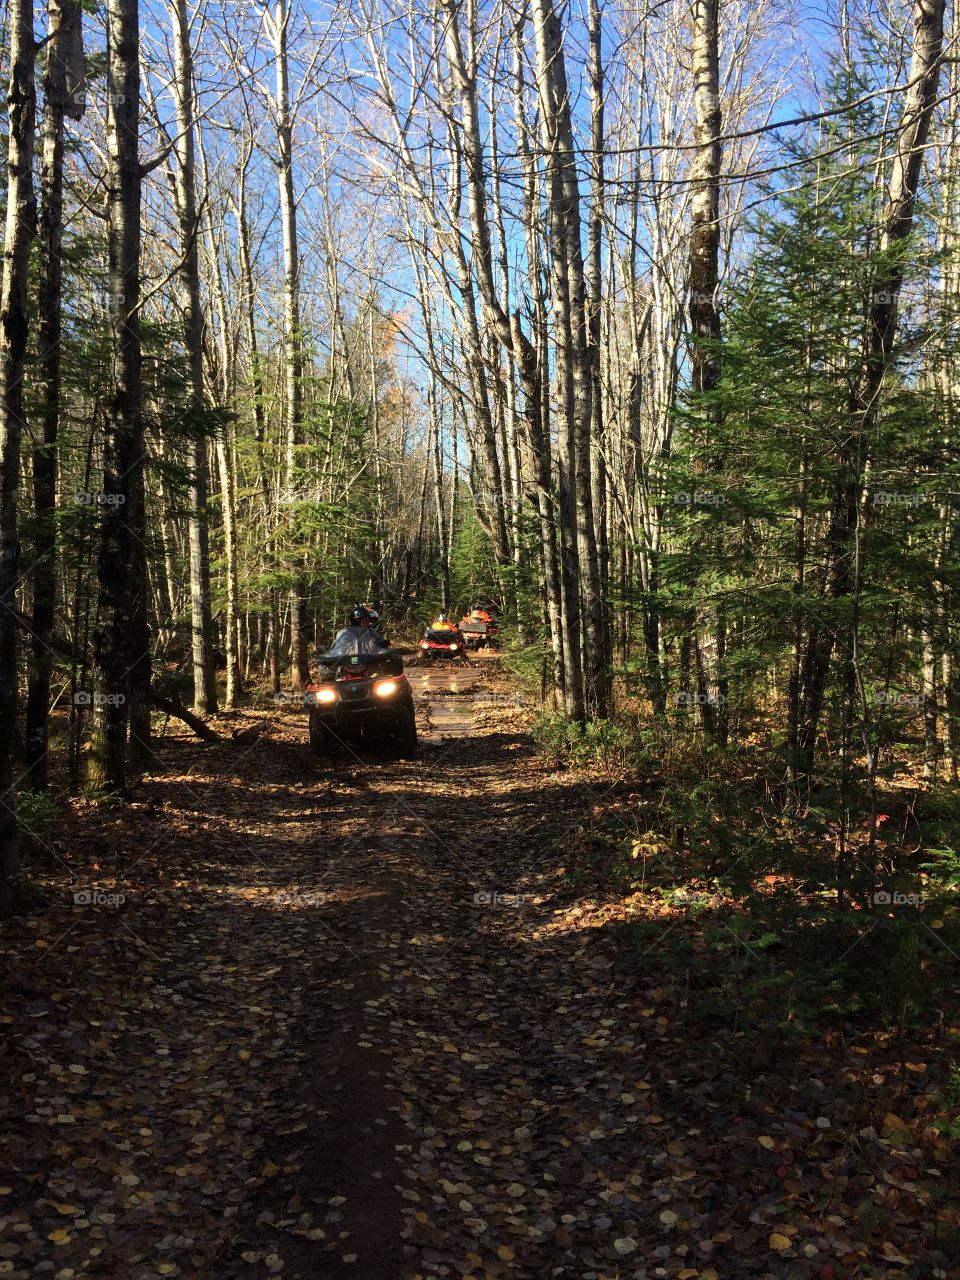 Four wheeling in the forest